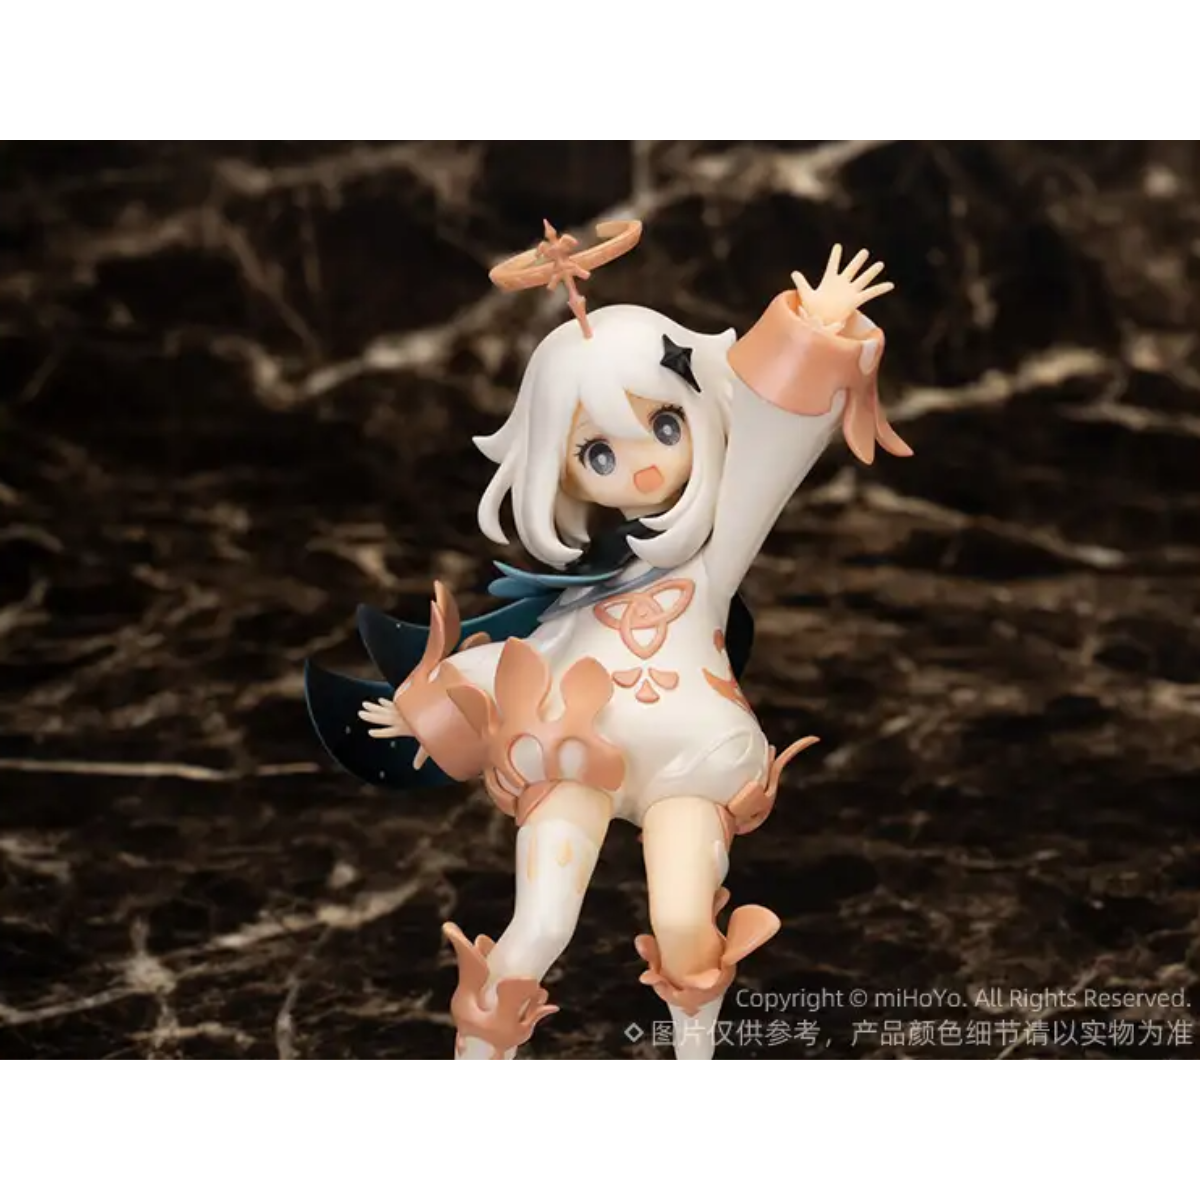 miHoYo Genshin Impact Paimon 1/7 Scale Figure (With white base)-miHoYo-Ace Cards &amp; Collectibles